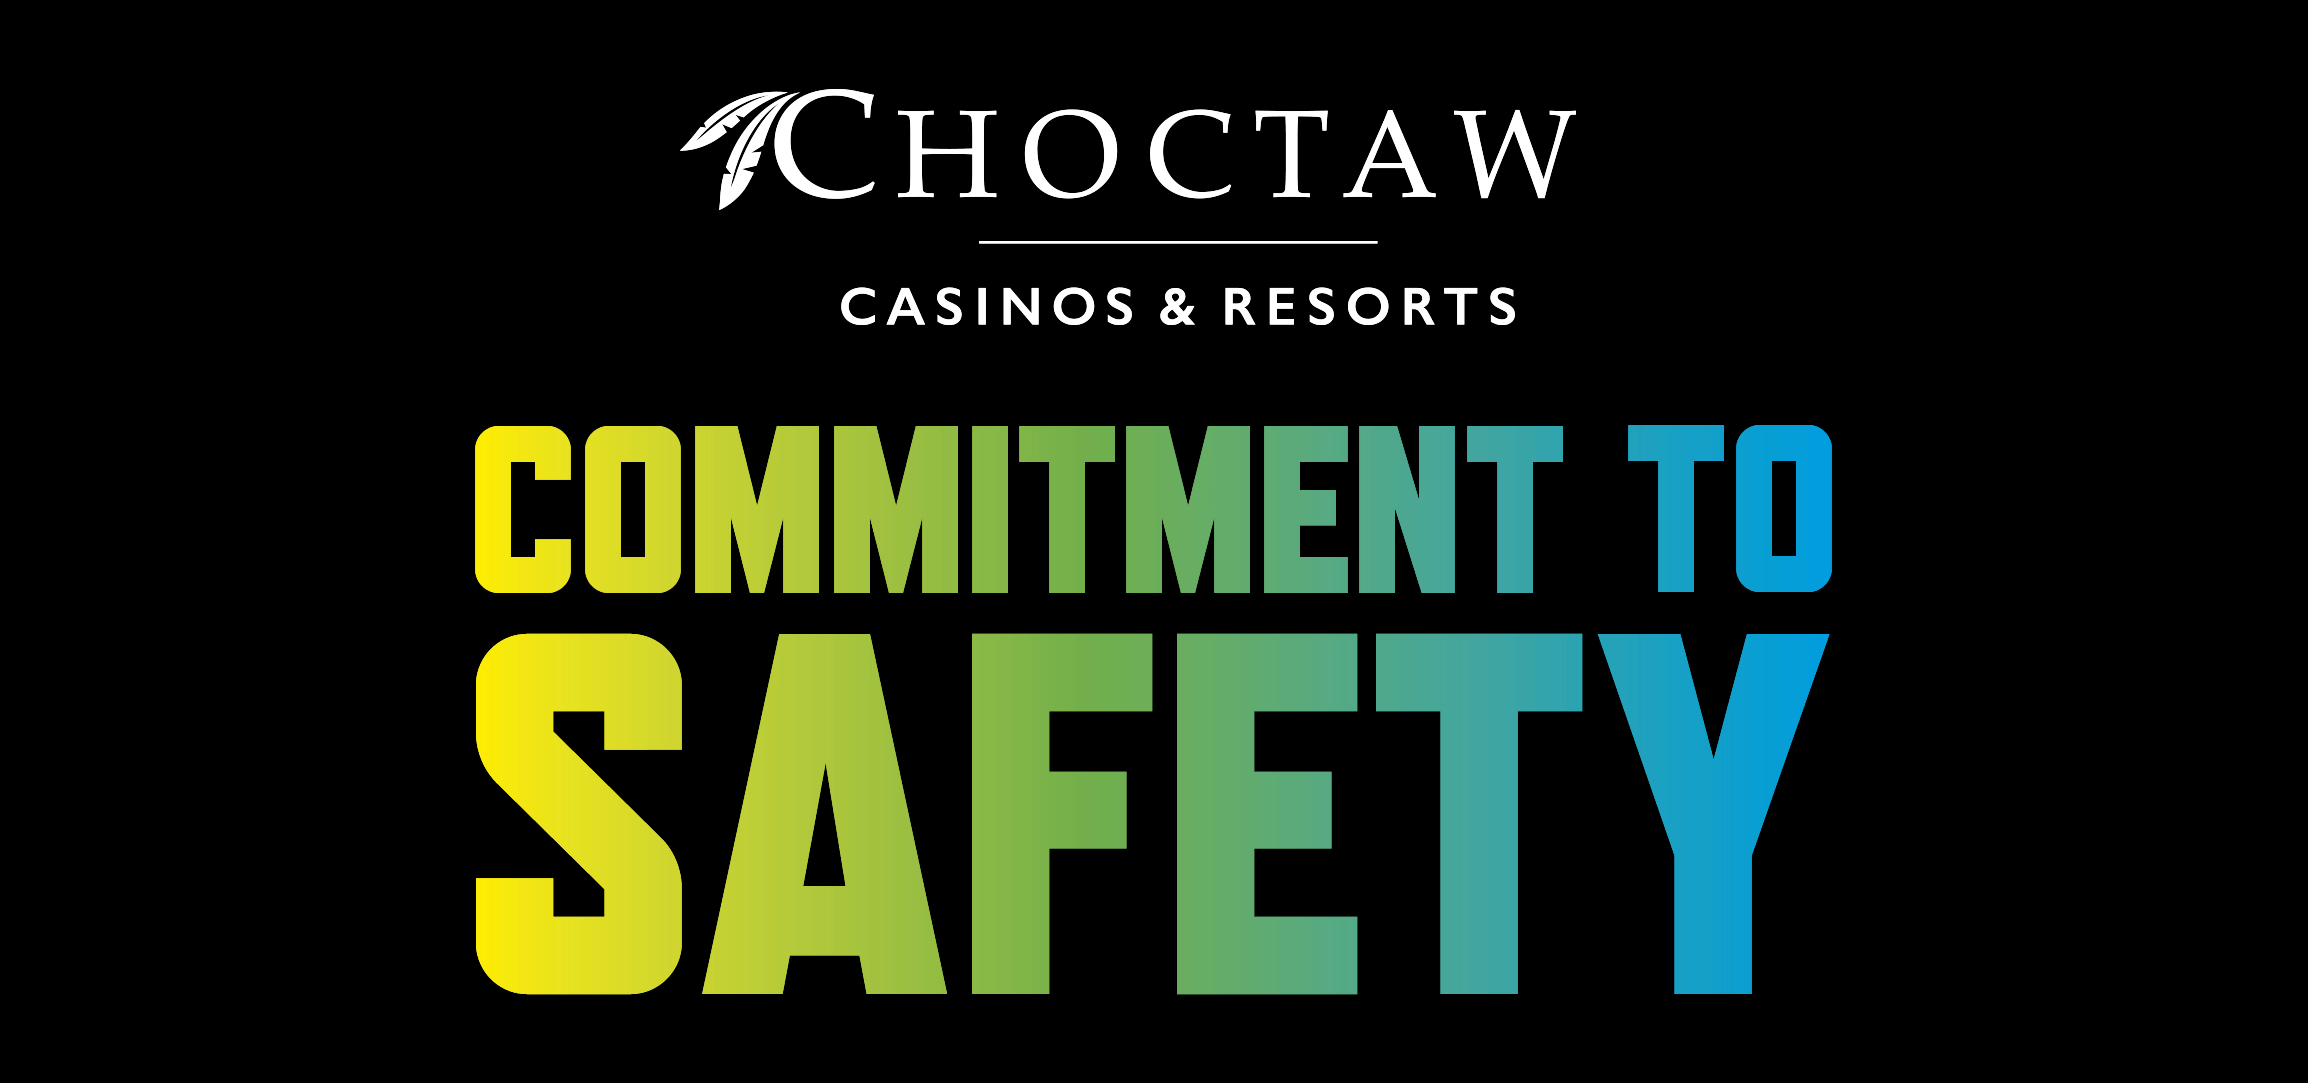 Our Commitment to Safety